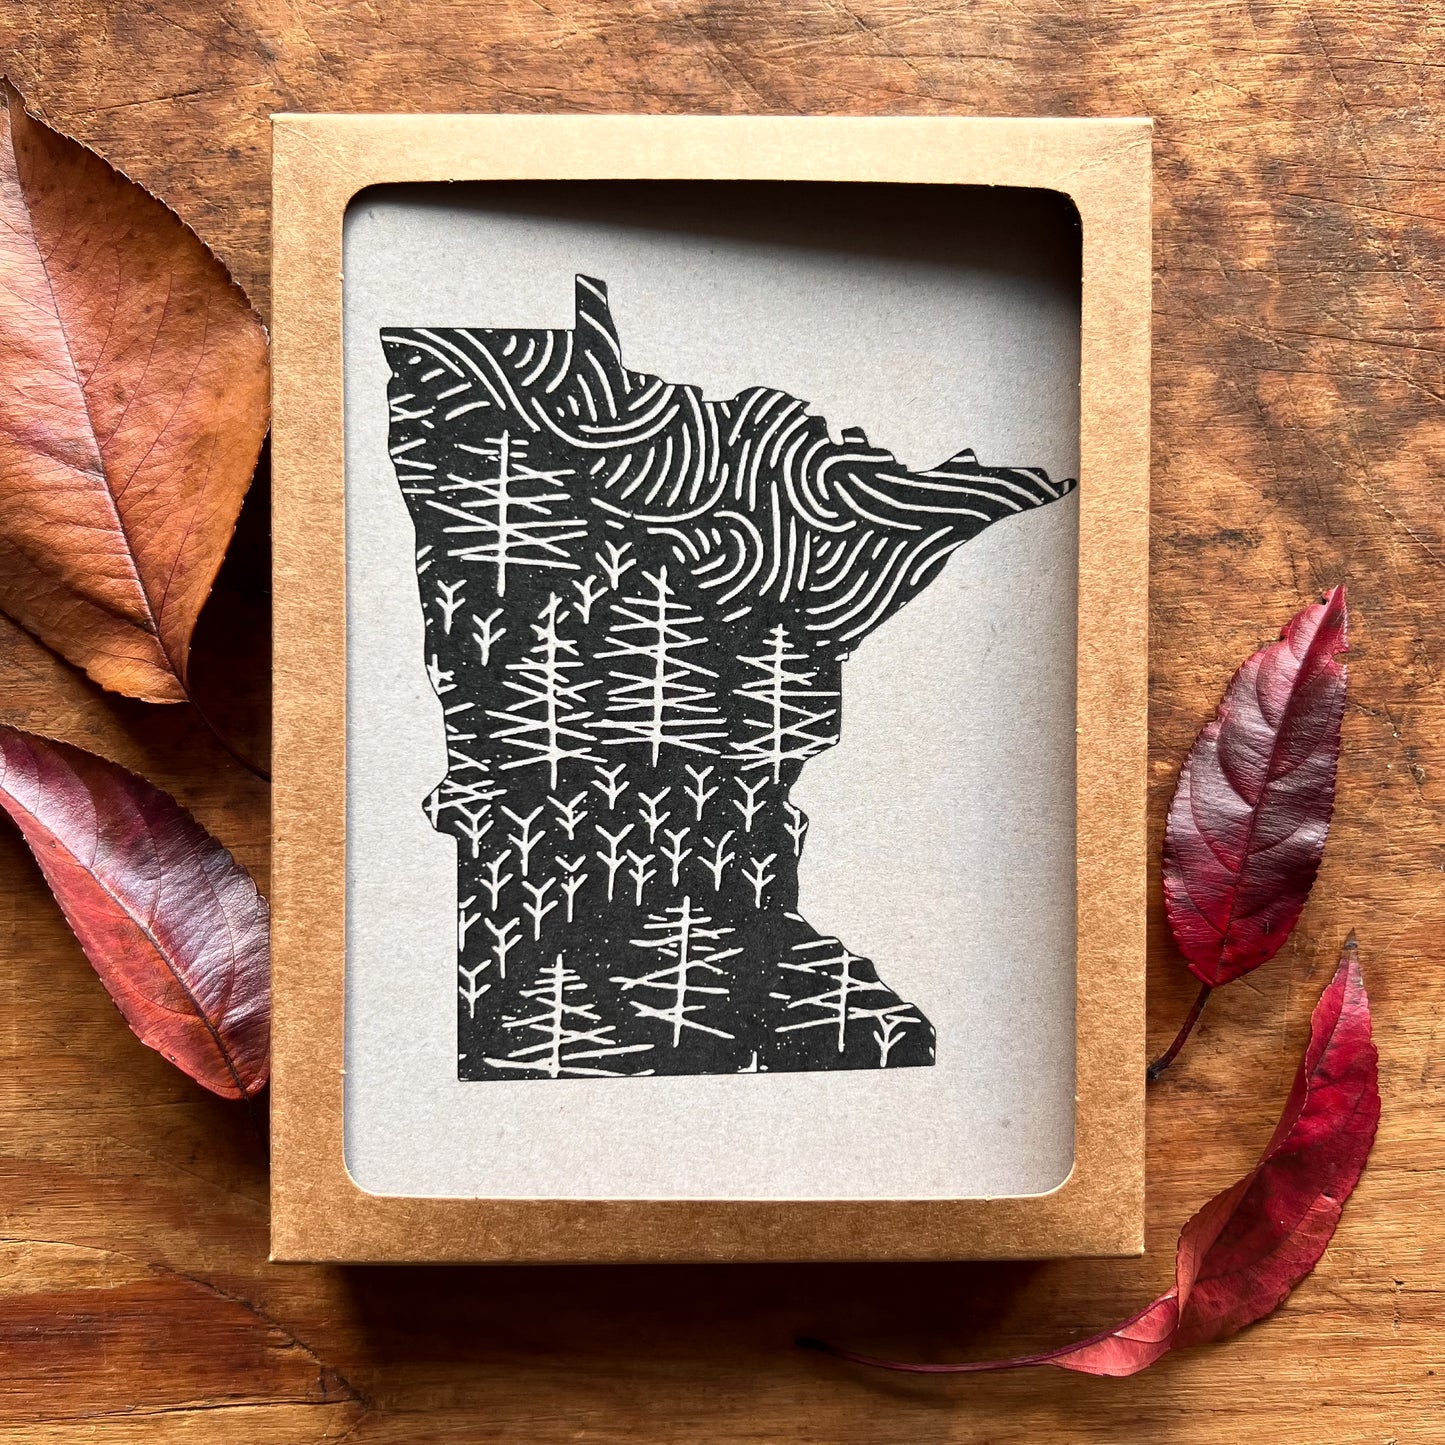 MN Pine Wandering Greeting Cards | Blank Inside, A2, Recycled